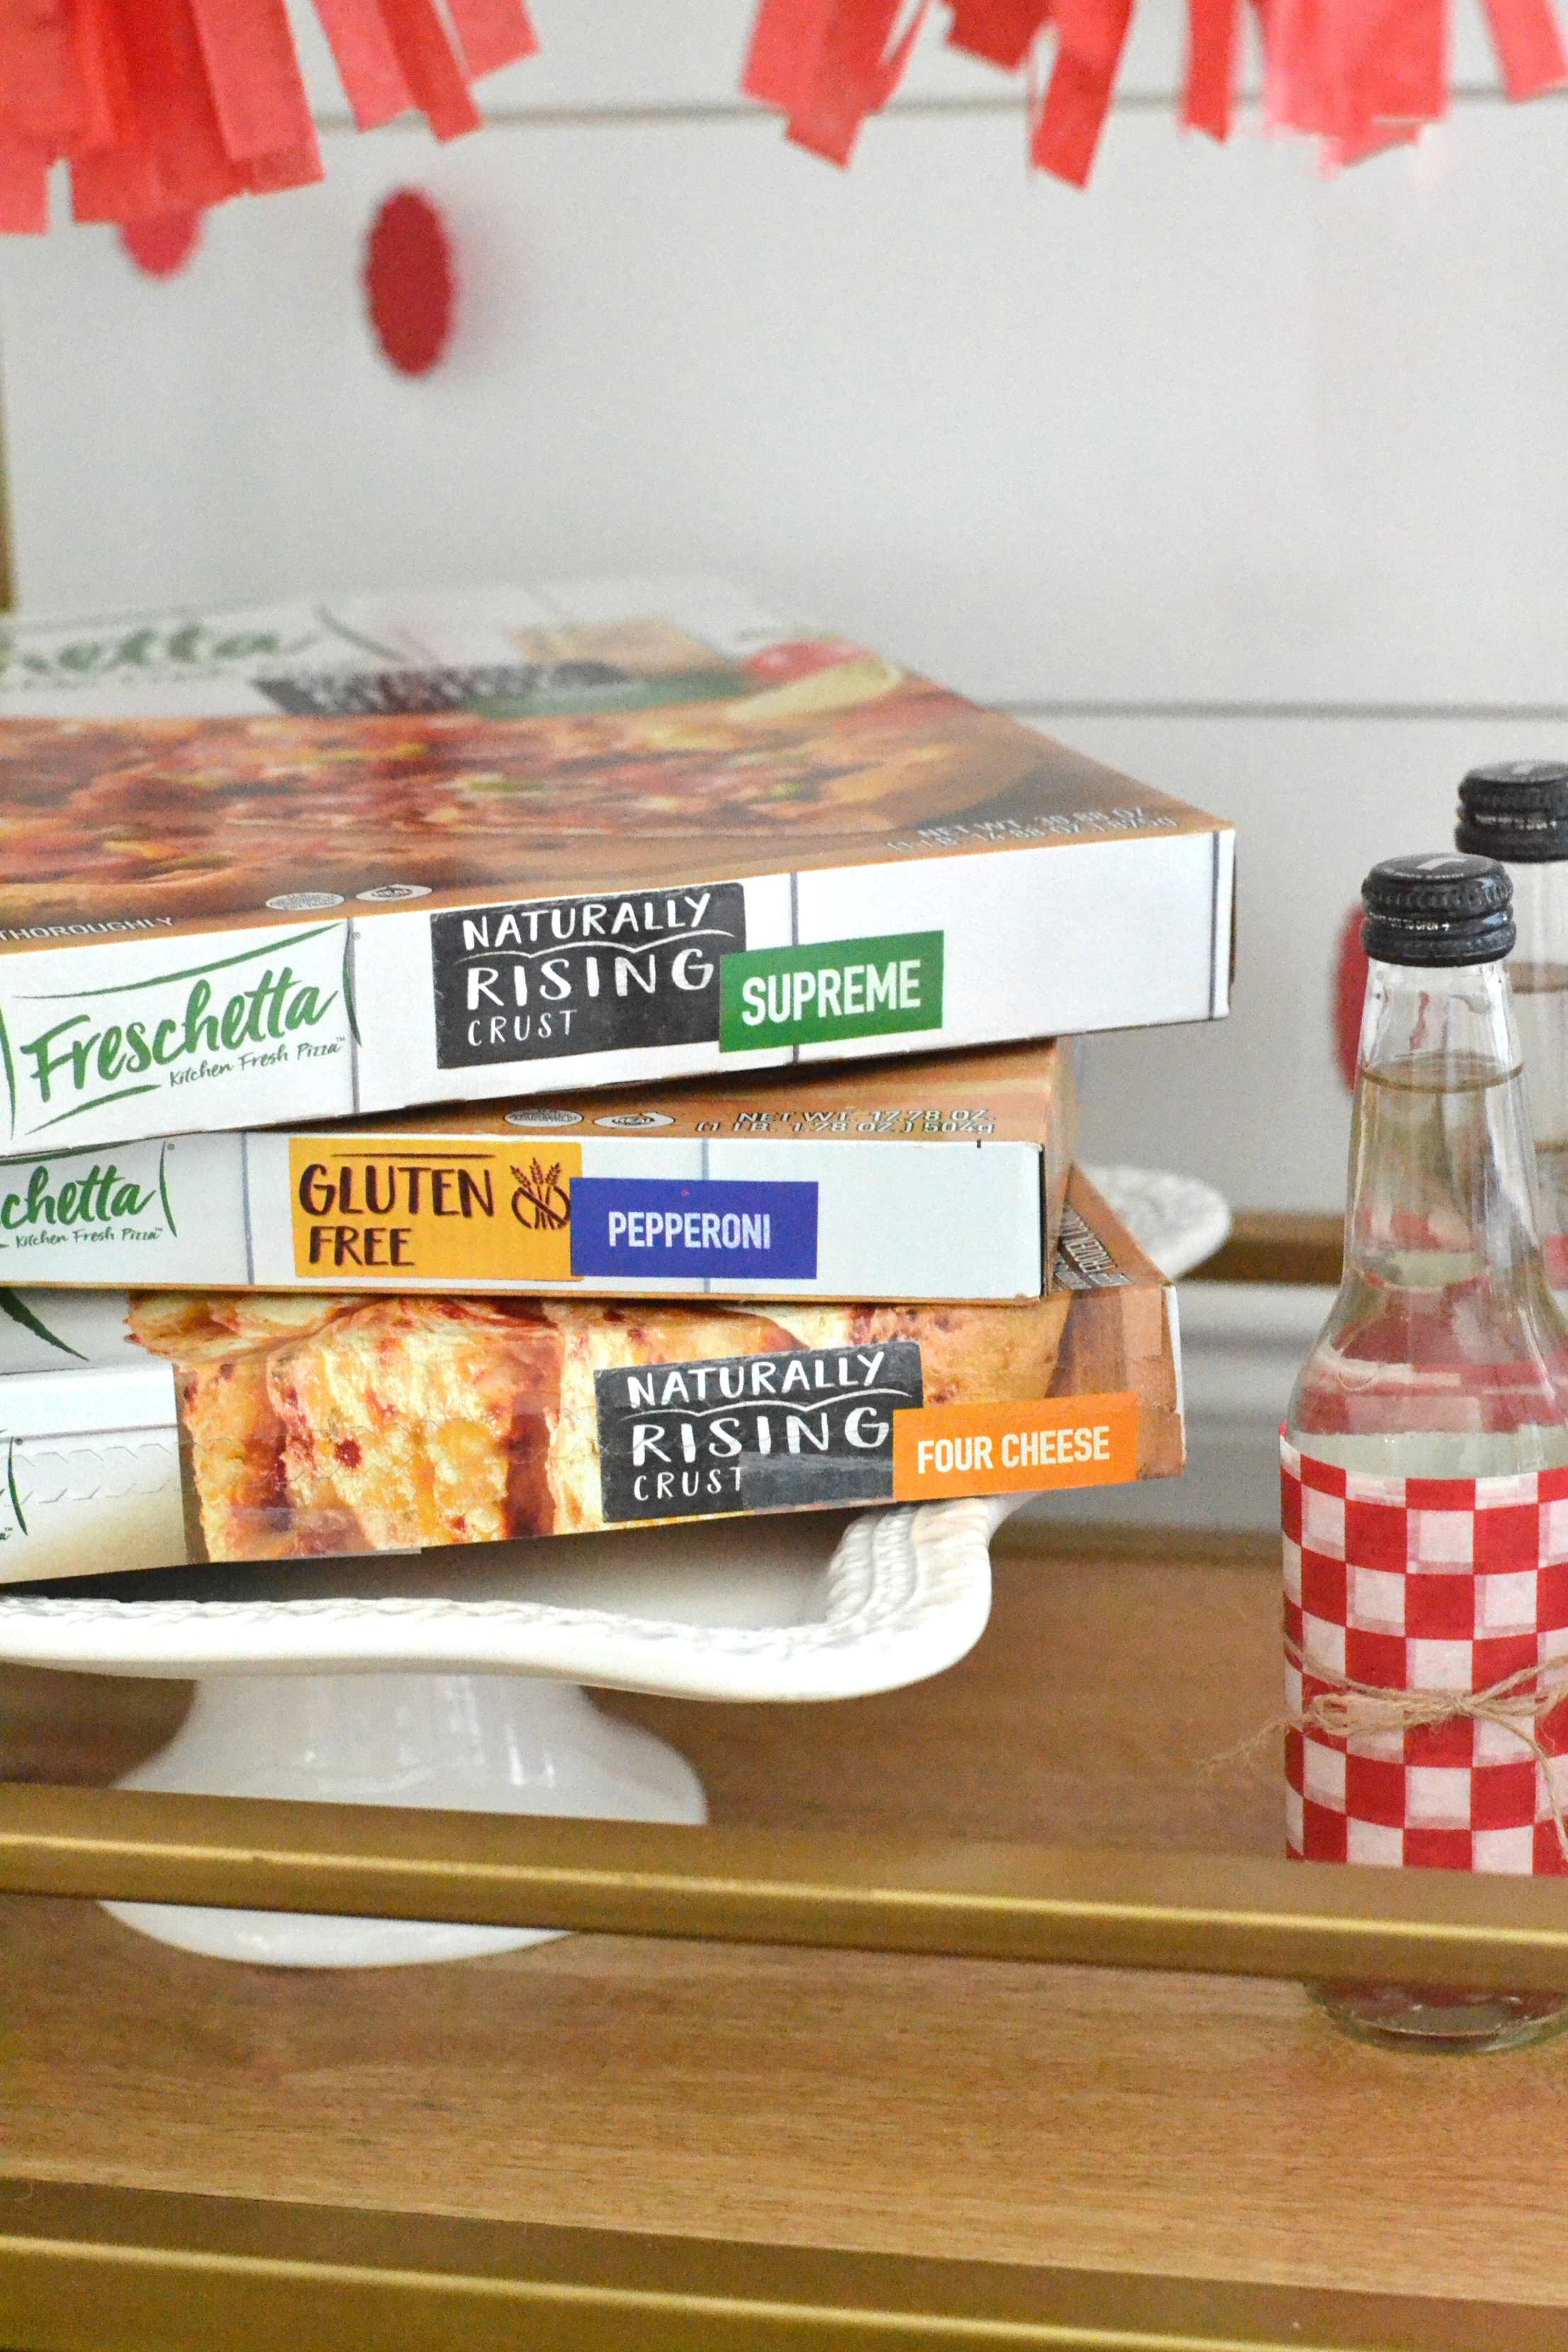 Date Night In: Pizza Party for Two #Ad #FreschettaFresh